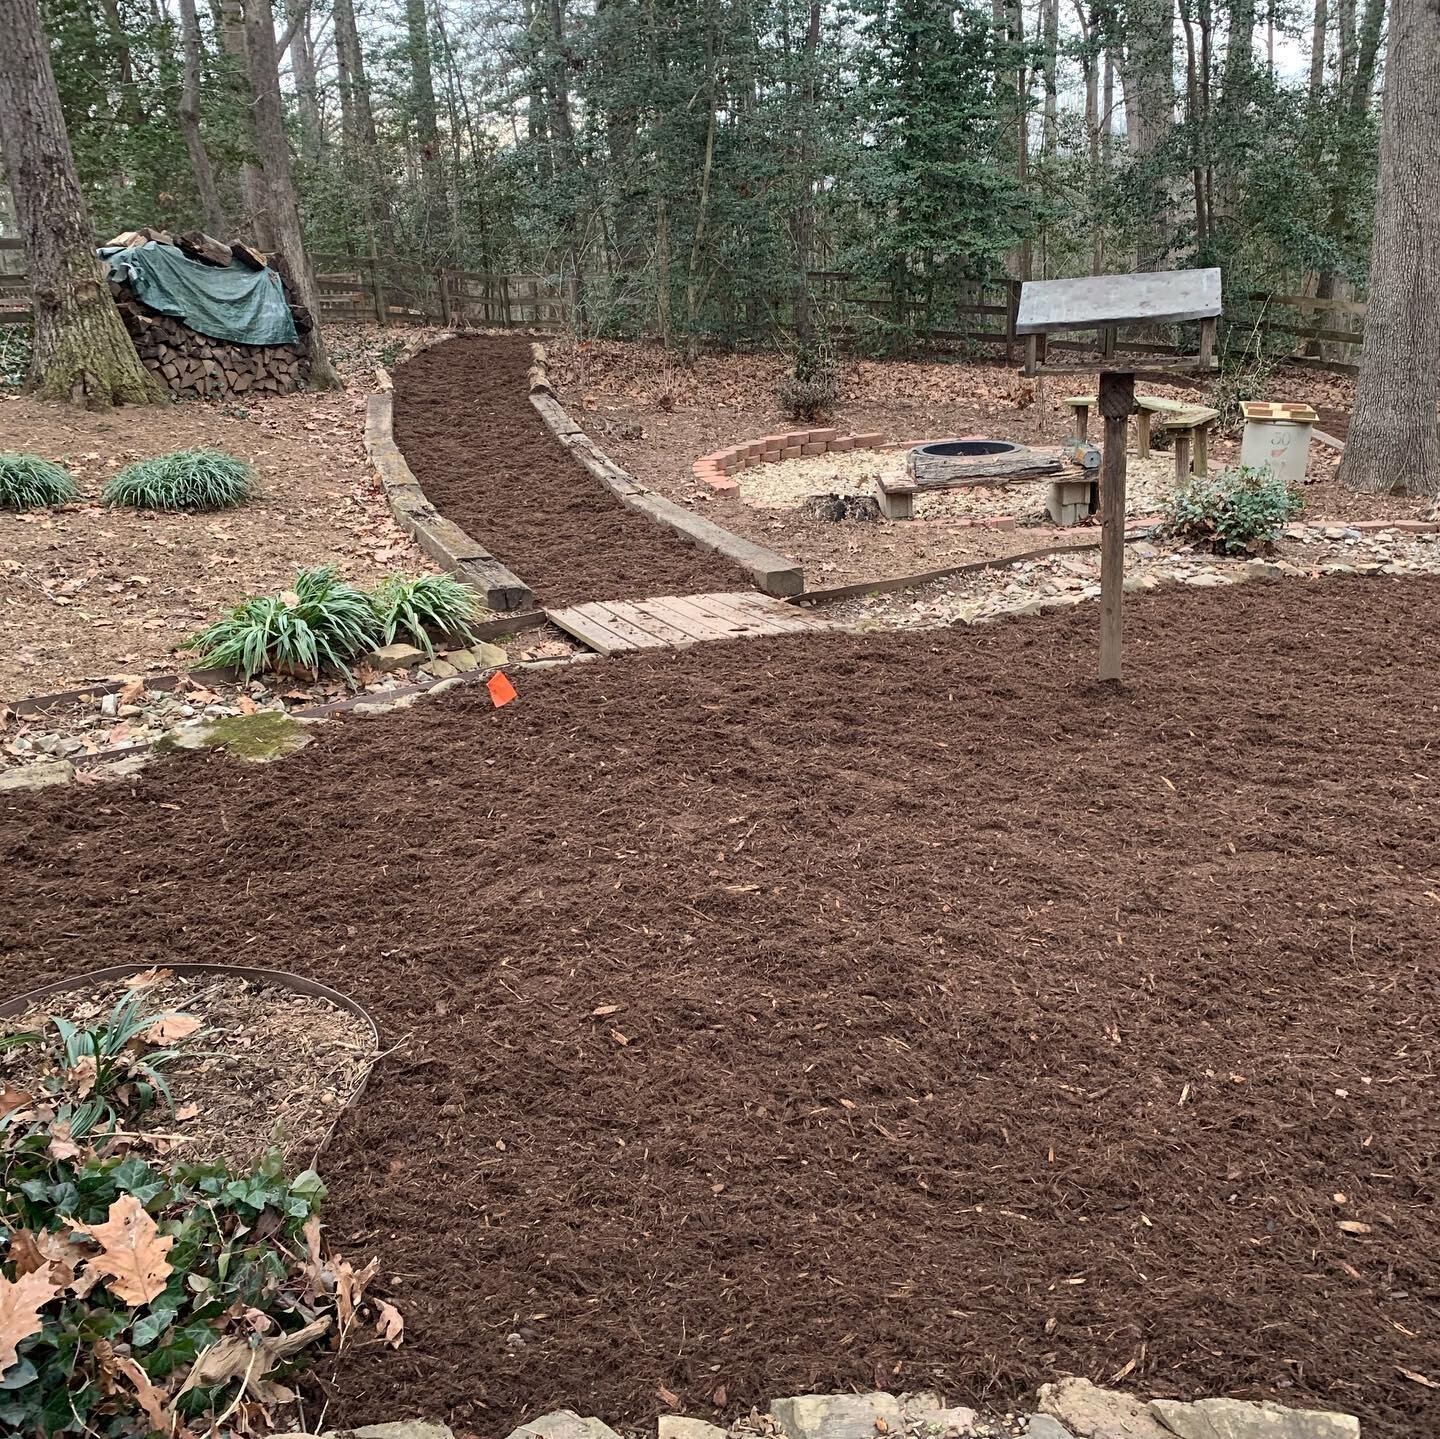 MULCH:

We added a fresh layer of mulch to our client&rsquo;s nature trail and it&rsquo;s looking great!